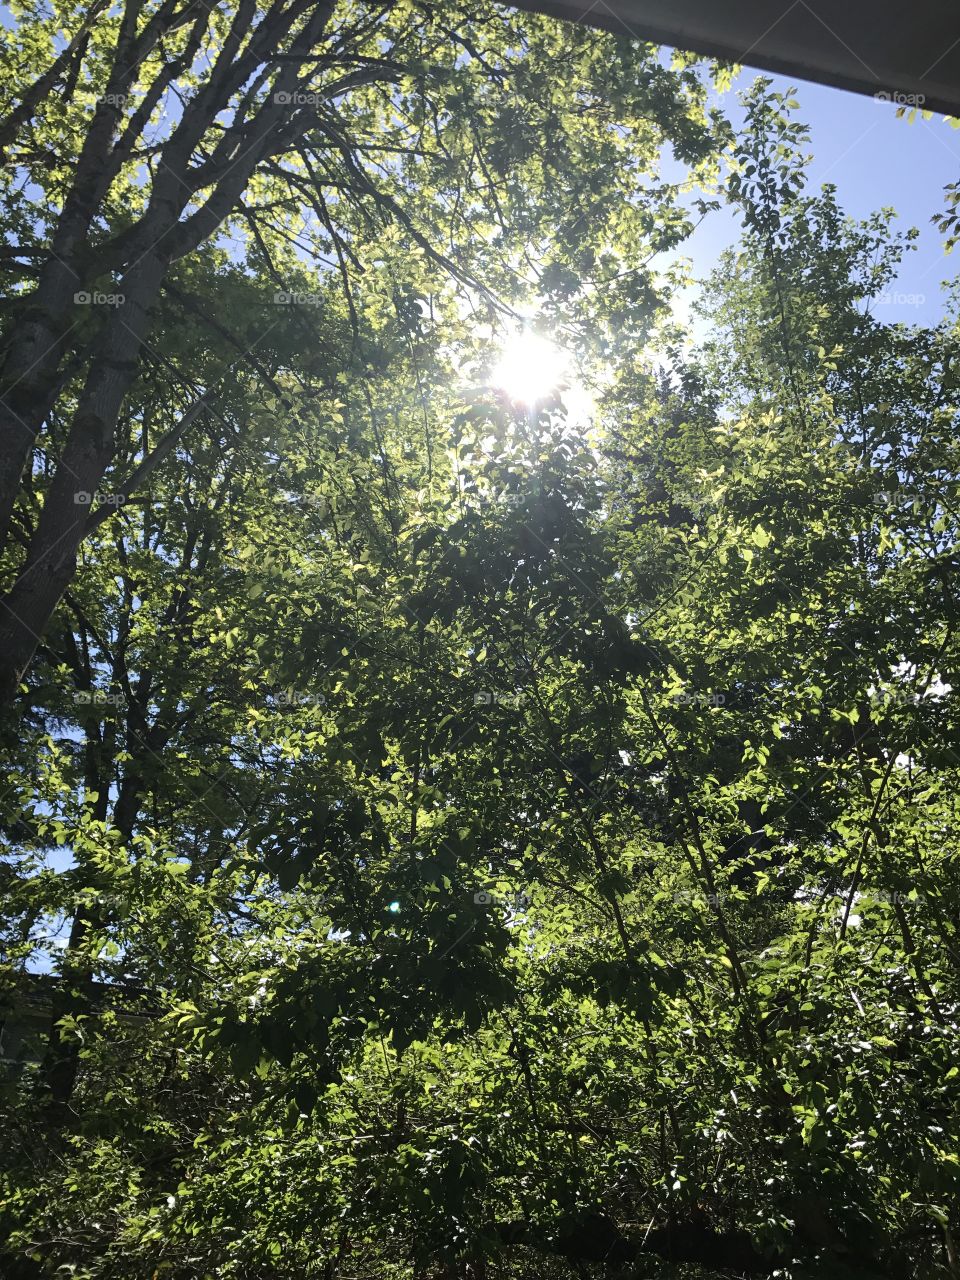 The sun peeking through the branches in the woods.
